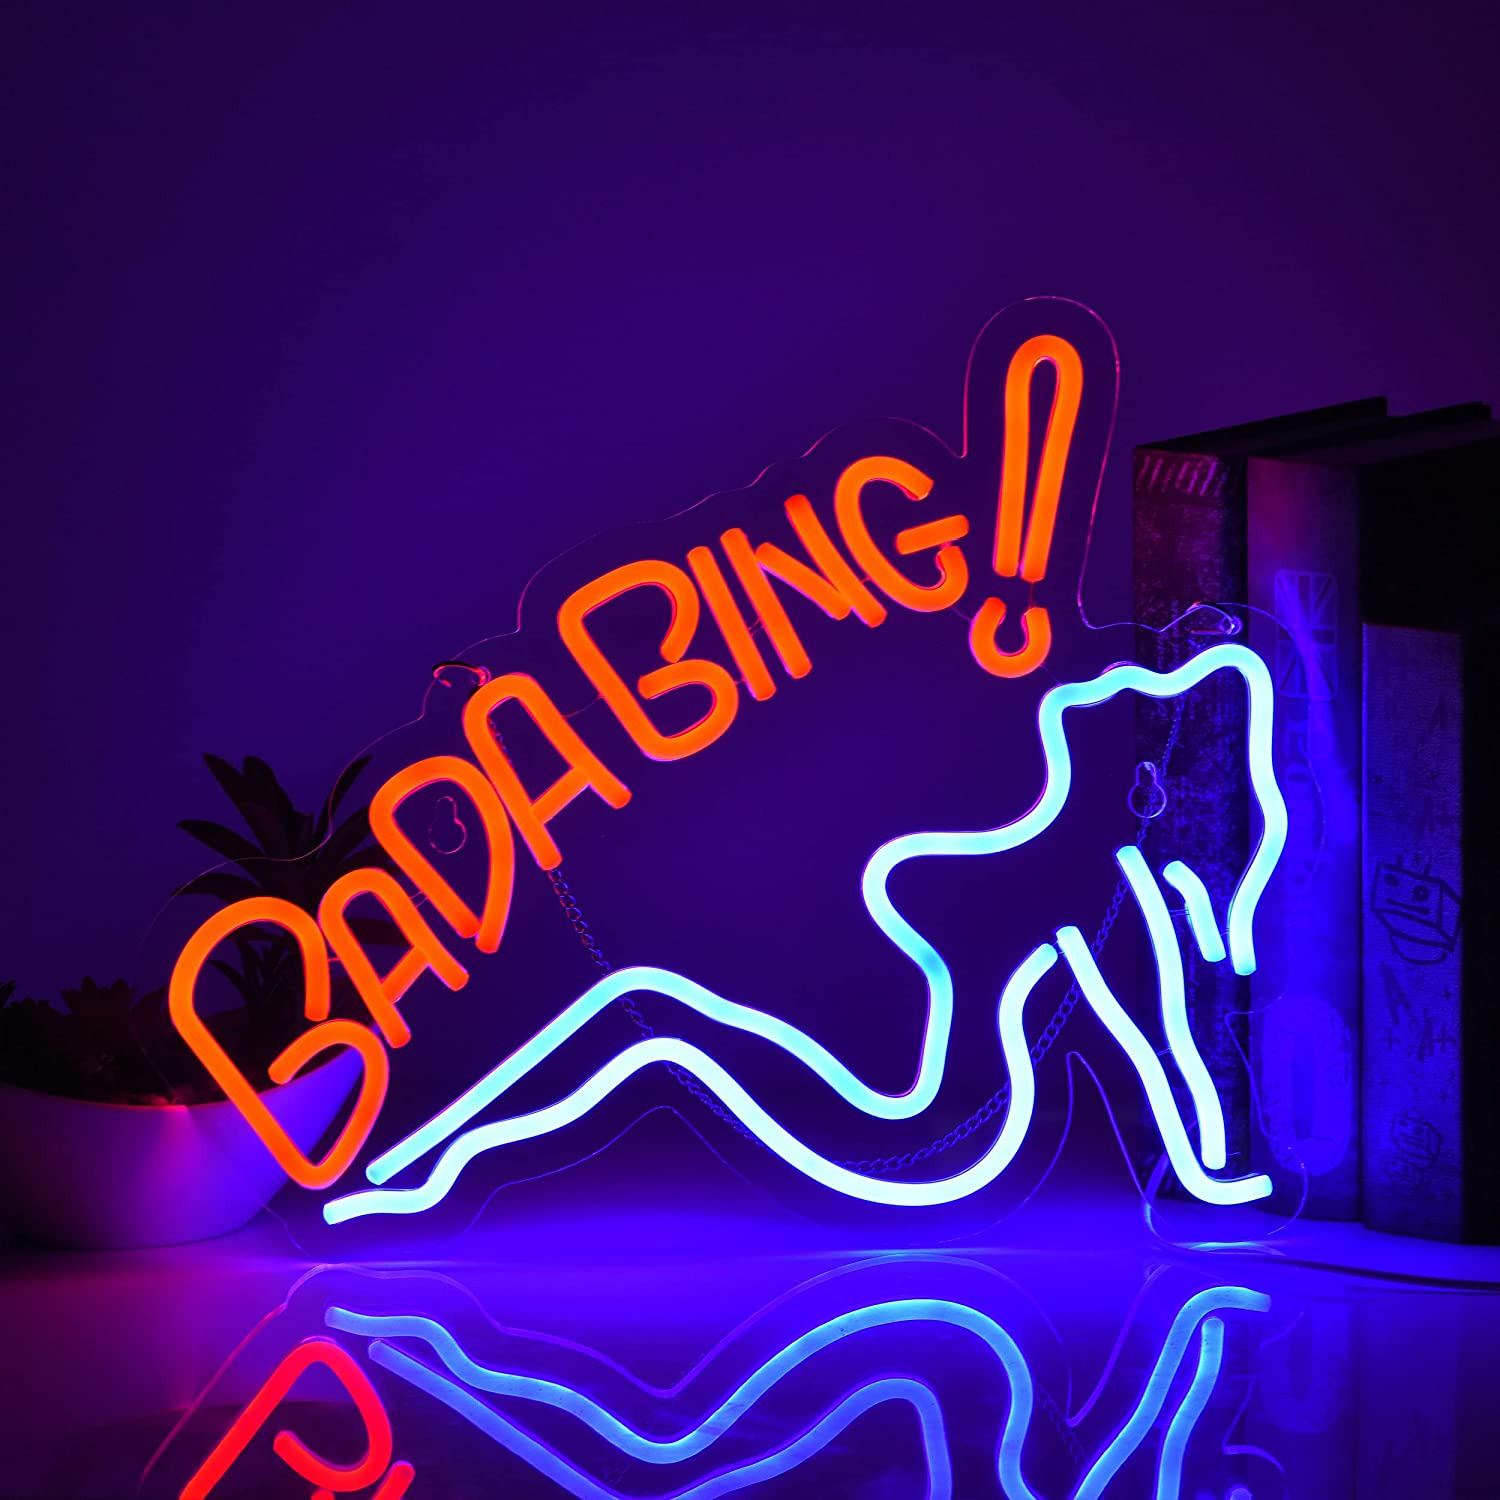 Bada Bing Neon Sign, Dimmable LED Man Cave Pub Store Bar Novelty Neon Wall Decor